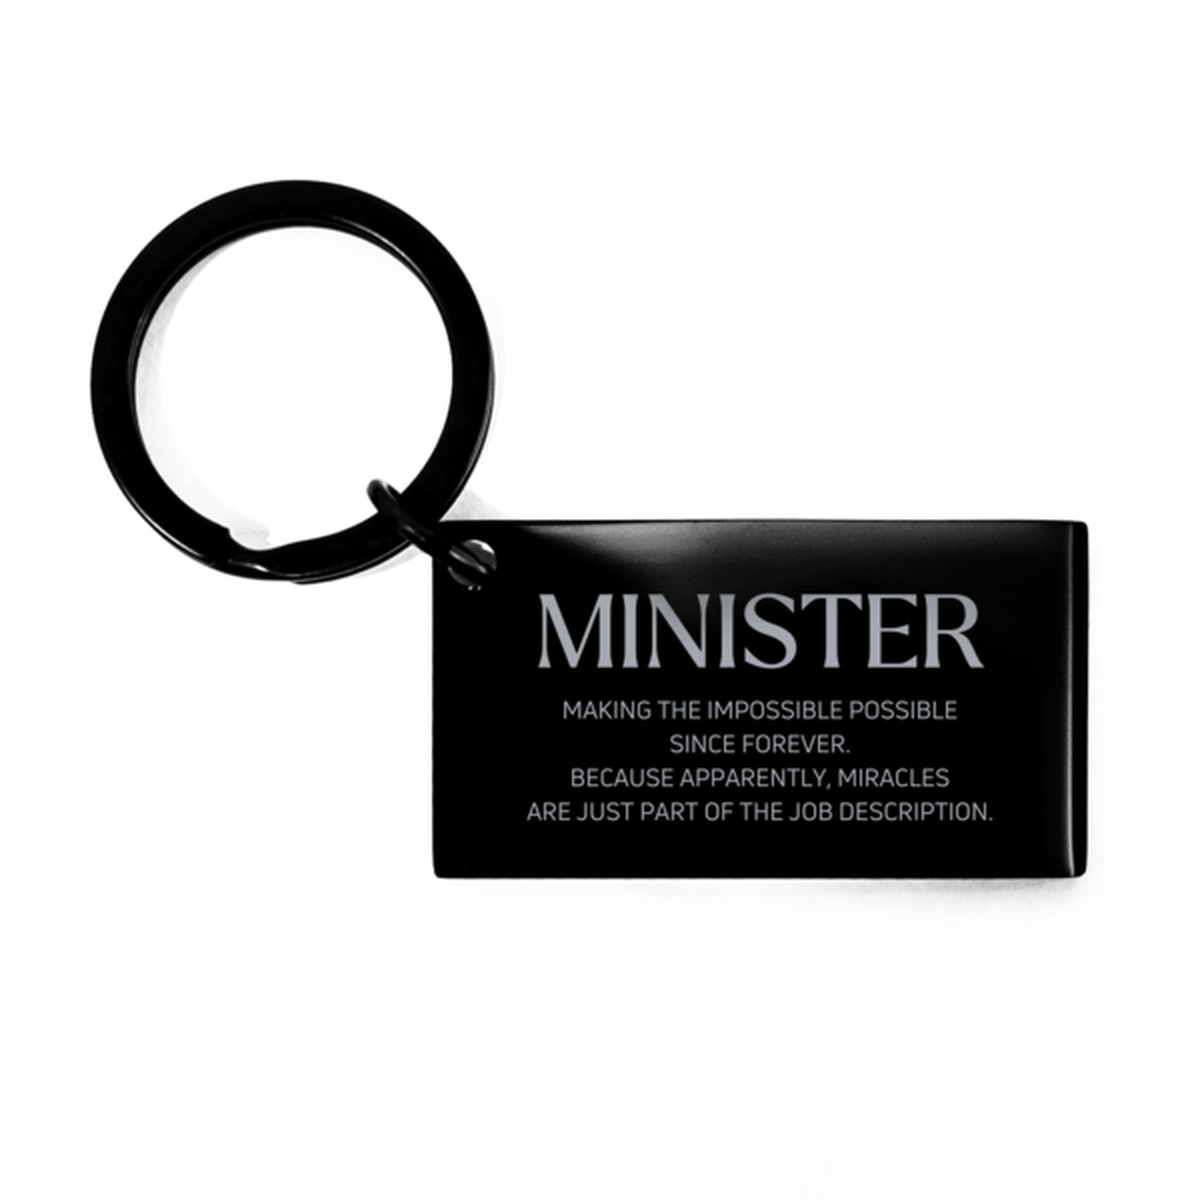 Funny Minister Gifts, Miracles are just part of the job description, Inspirational Birthday Keychain For Minister, Men, Women, Coworkers, Friends, Boss